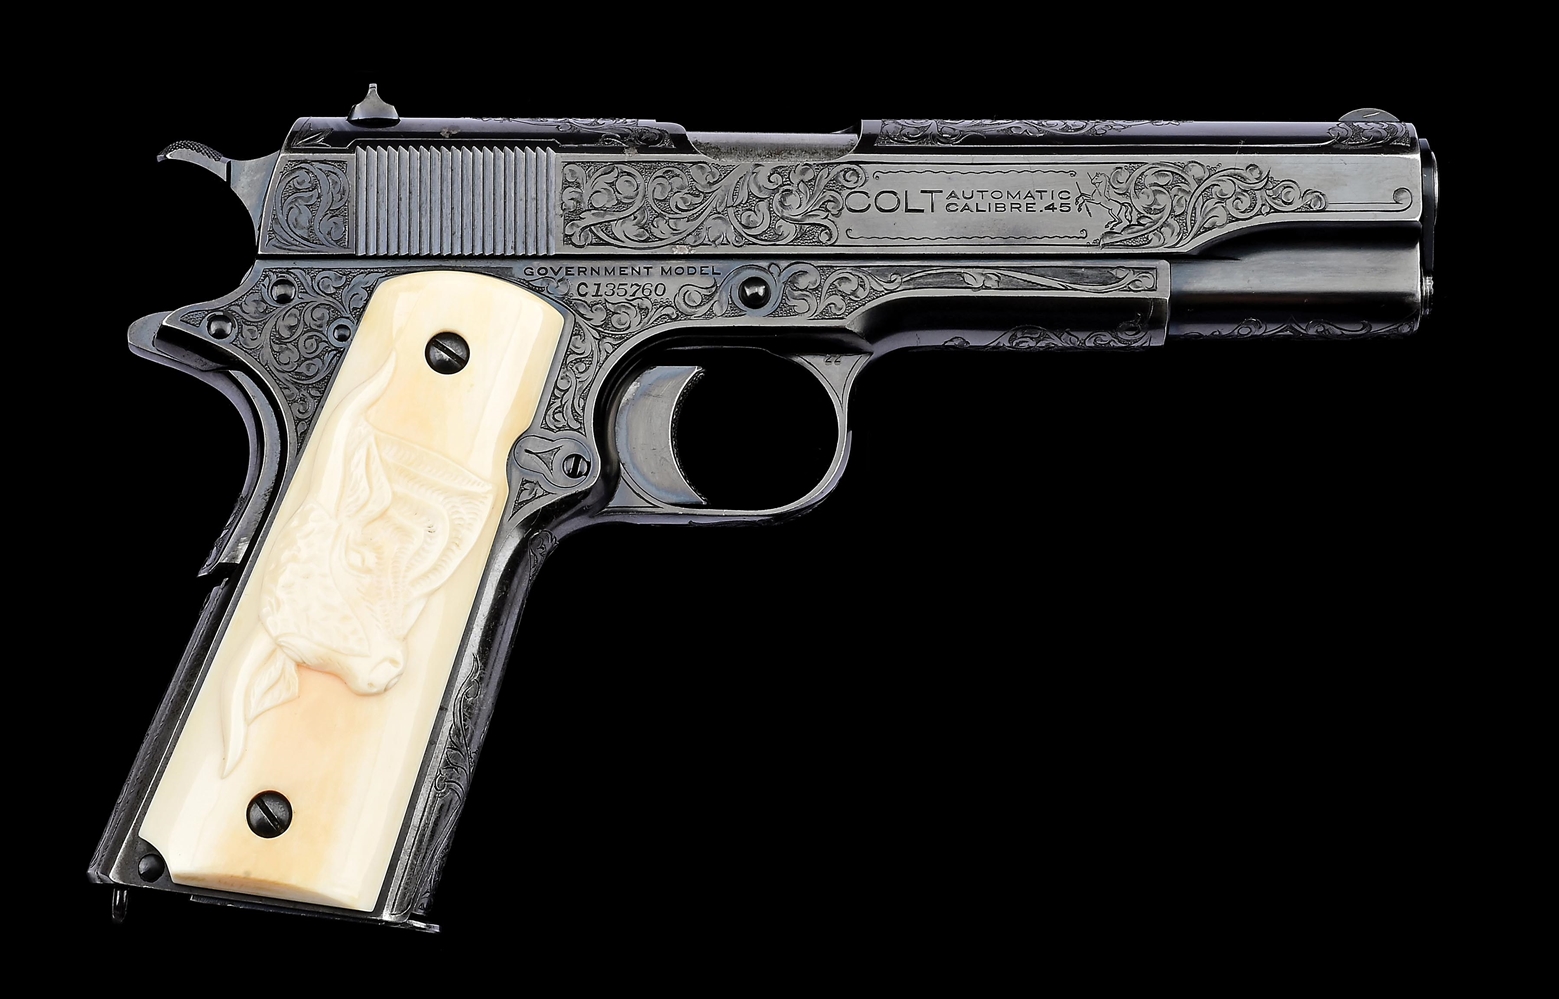 (C) A VERY RARE AND INTERESTING INTER-WAR PERIOD FACTORY ENGRAVED COLT GOVERNMENT MODEL 1911 .45 ACP SEMI AUTOMATIC PISTOL WITH BOX.